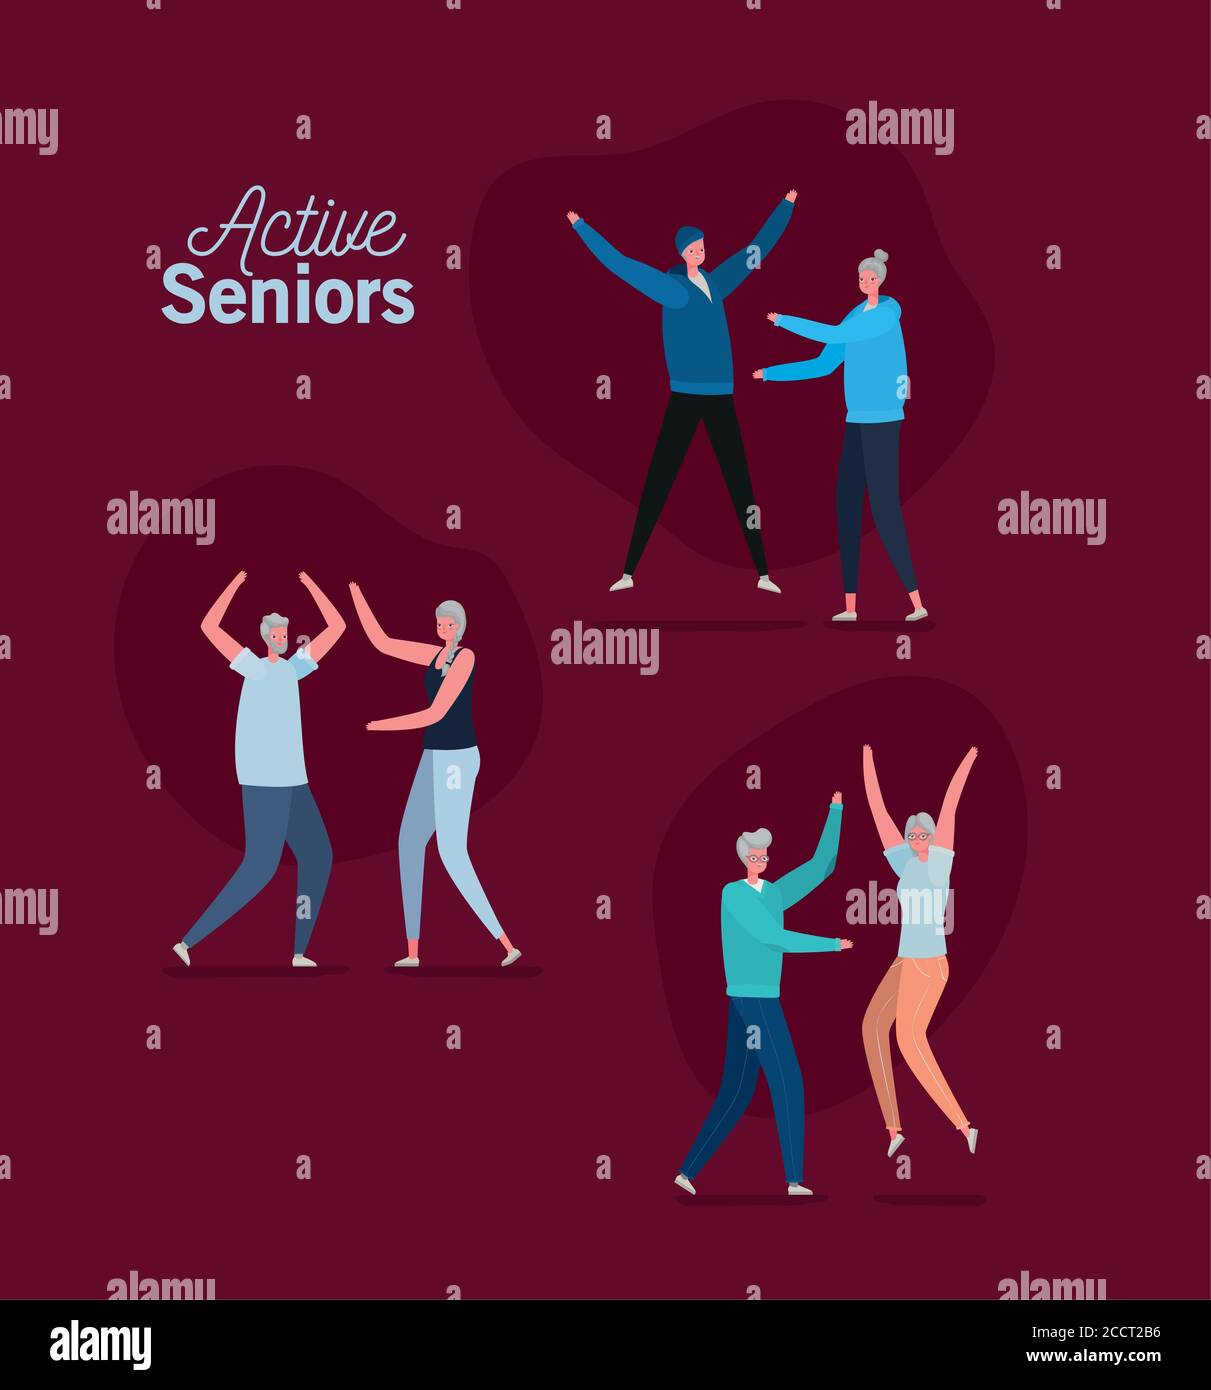 Set of active seniors woman and man cartoons on red background design, Activity theme Vector illustration Stock Vector